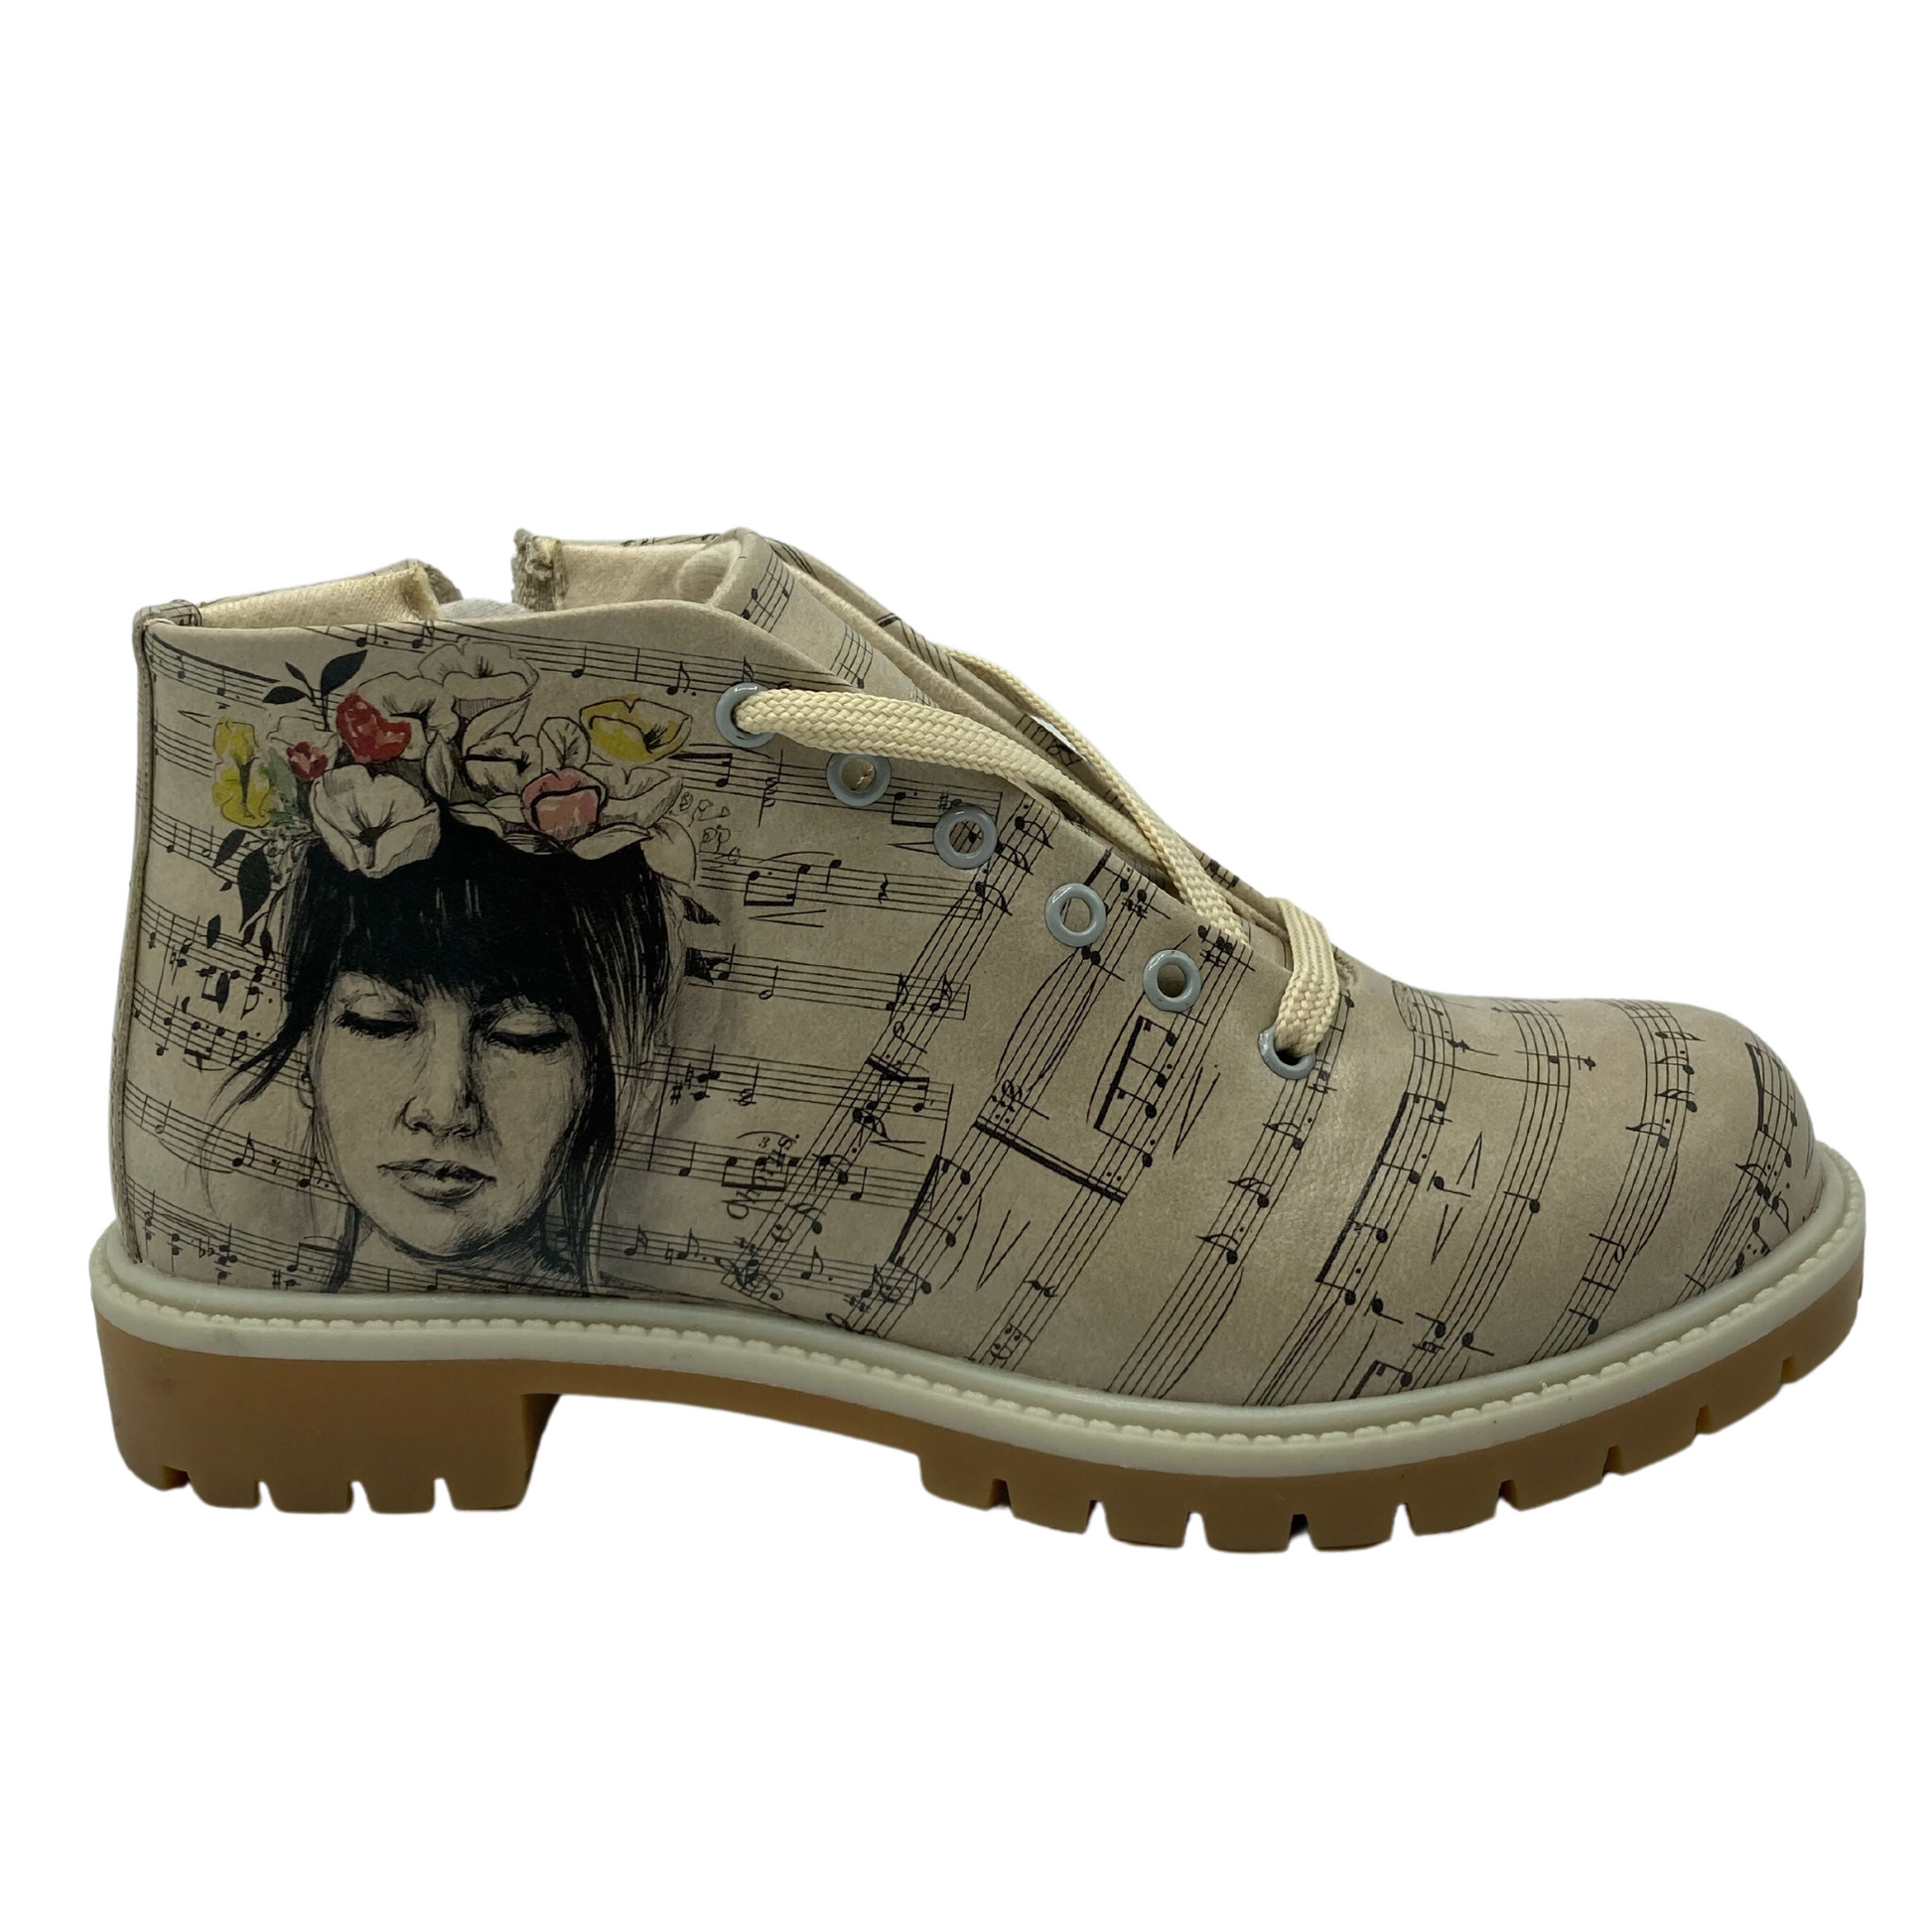 Right facing view of vegan leather short boot with sheet music pattern and an image of a woman in a flower crown on the outer ankle